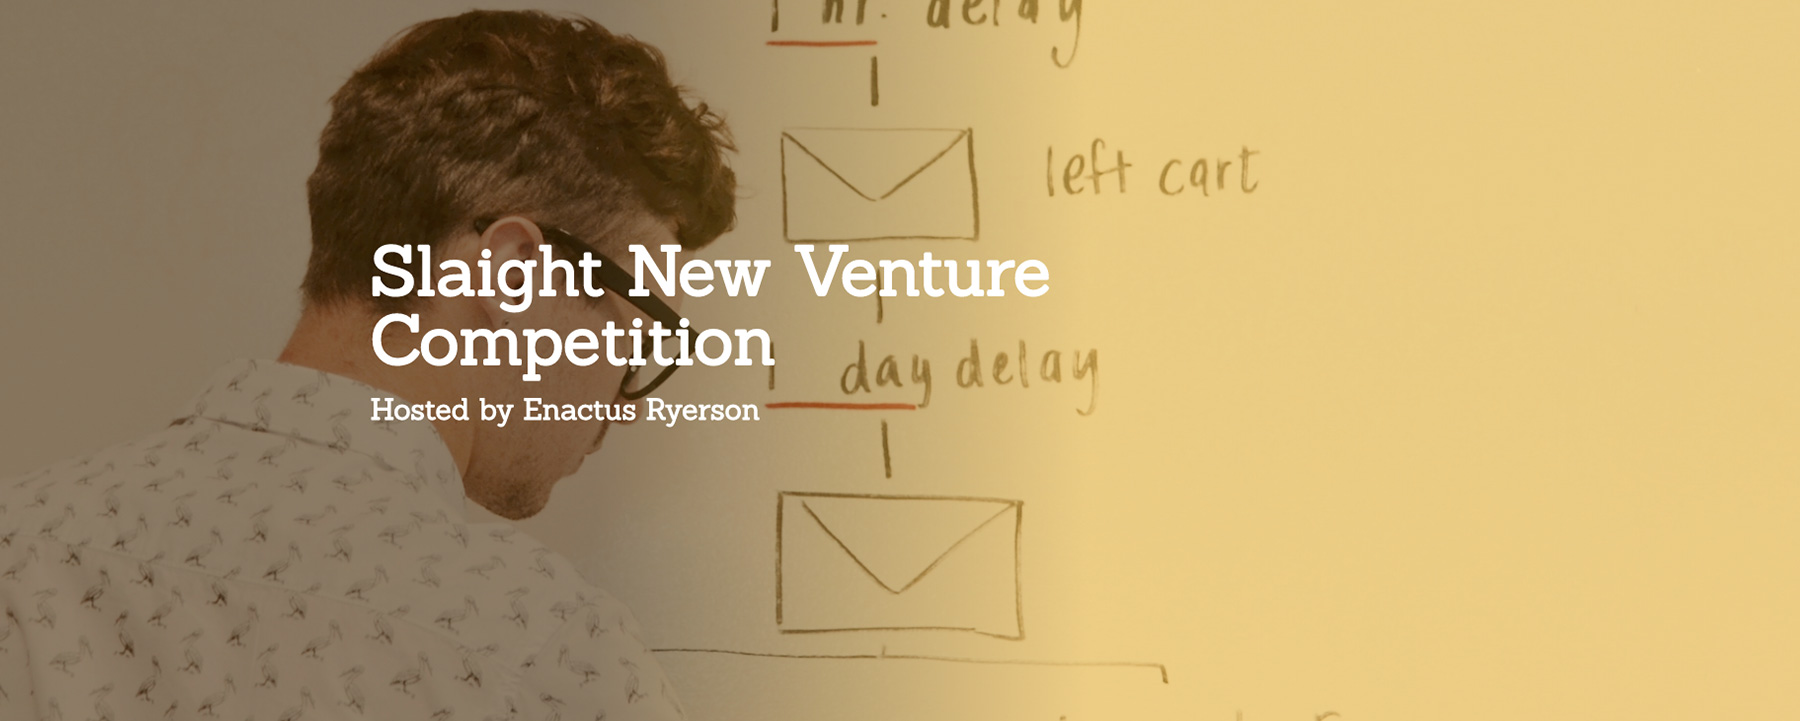 Slaight New Venture Competition banner